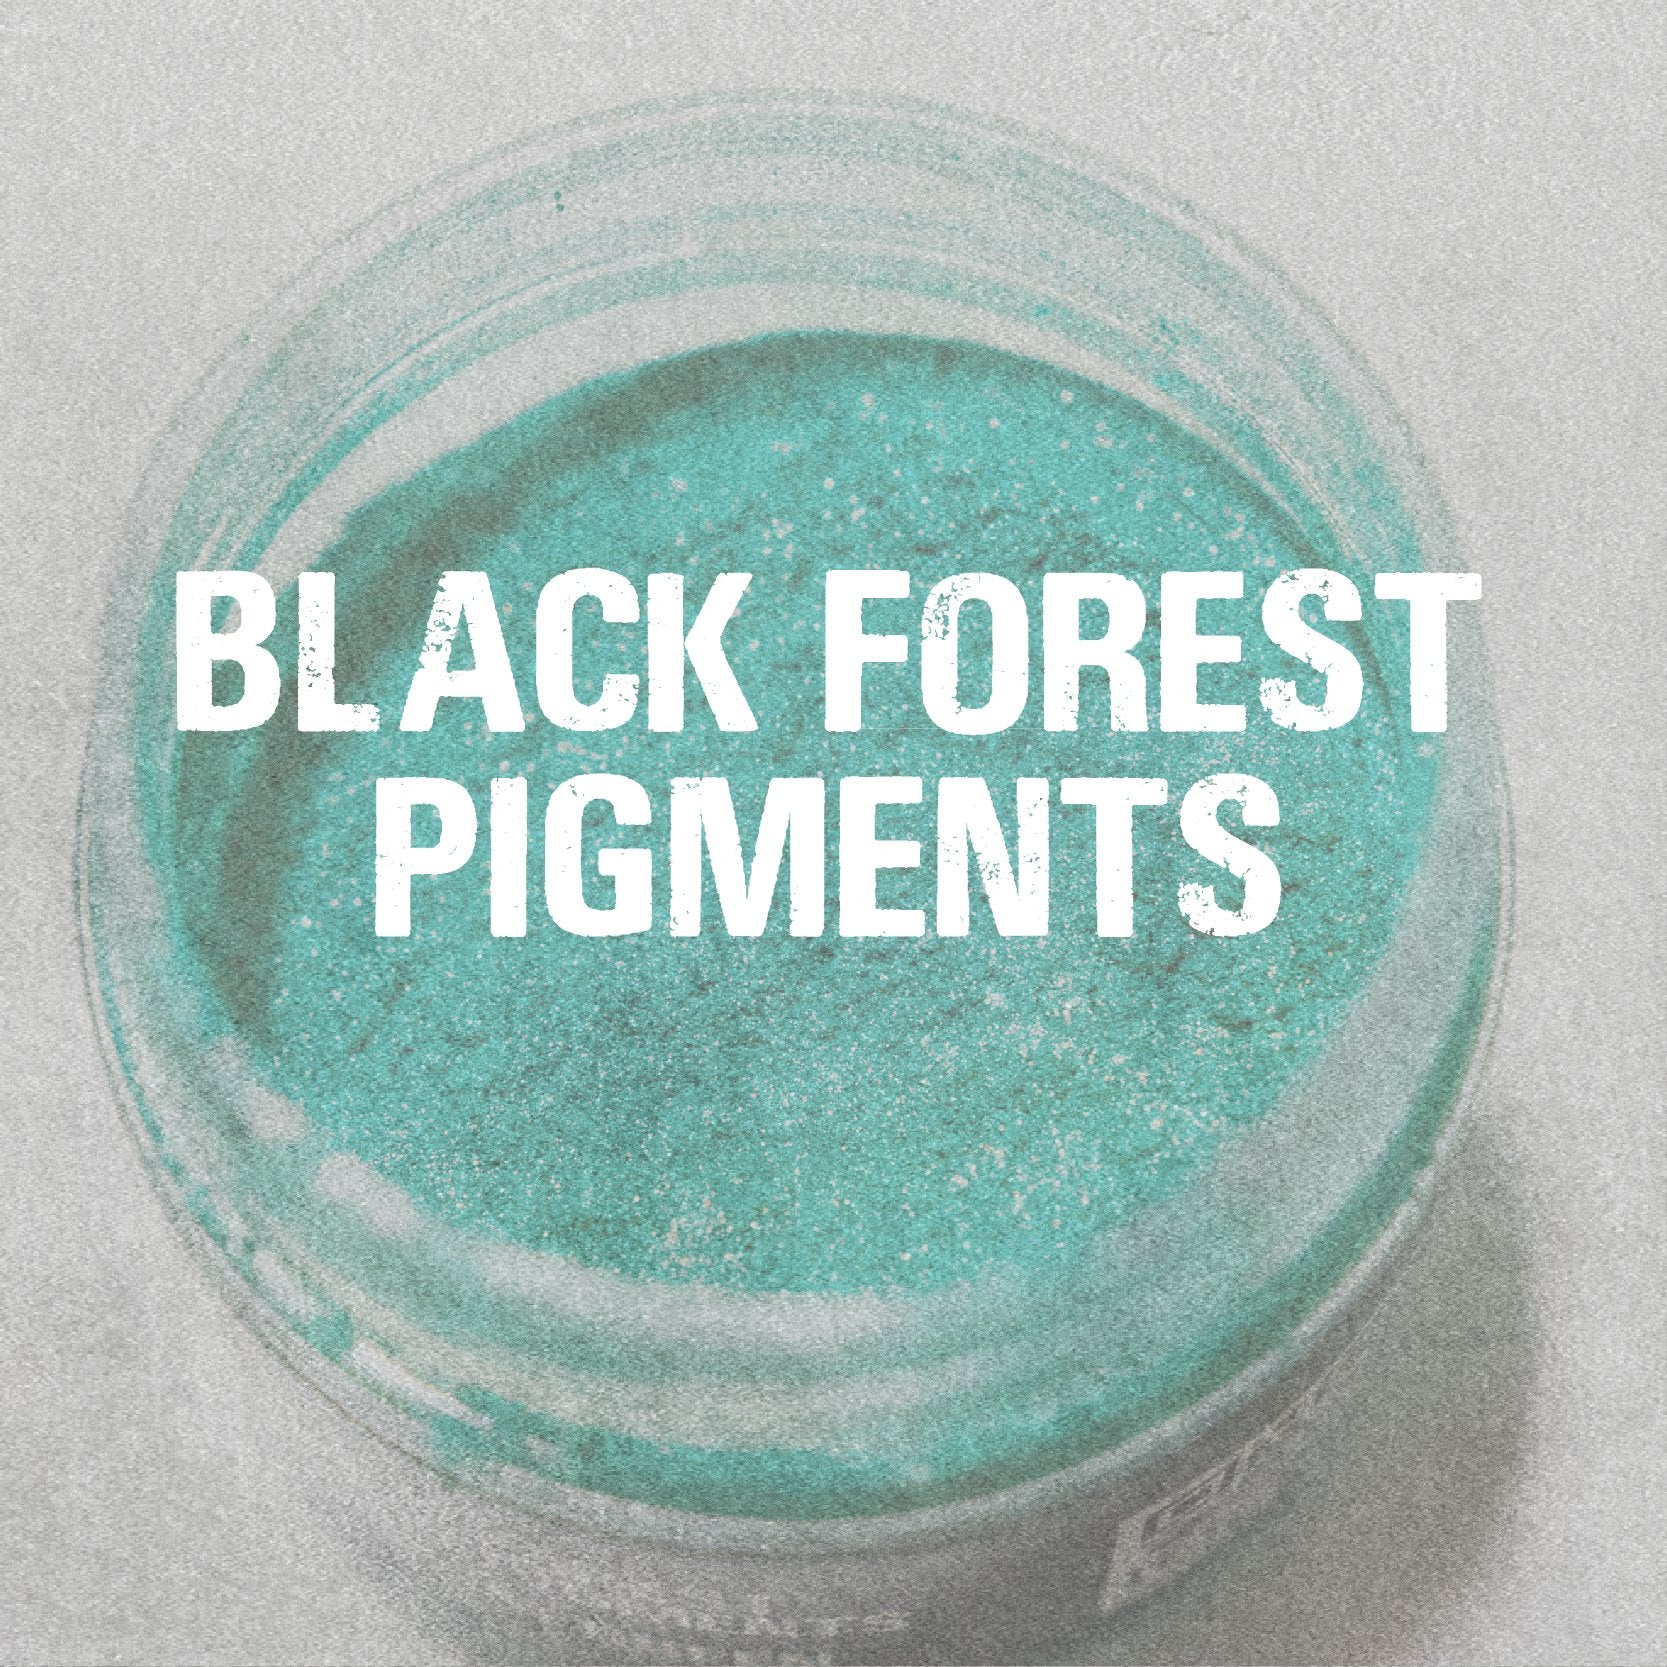 Black Forest Pigments